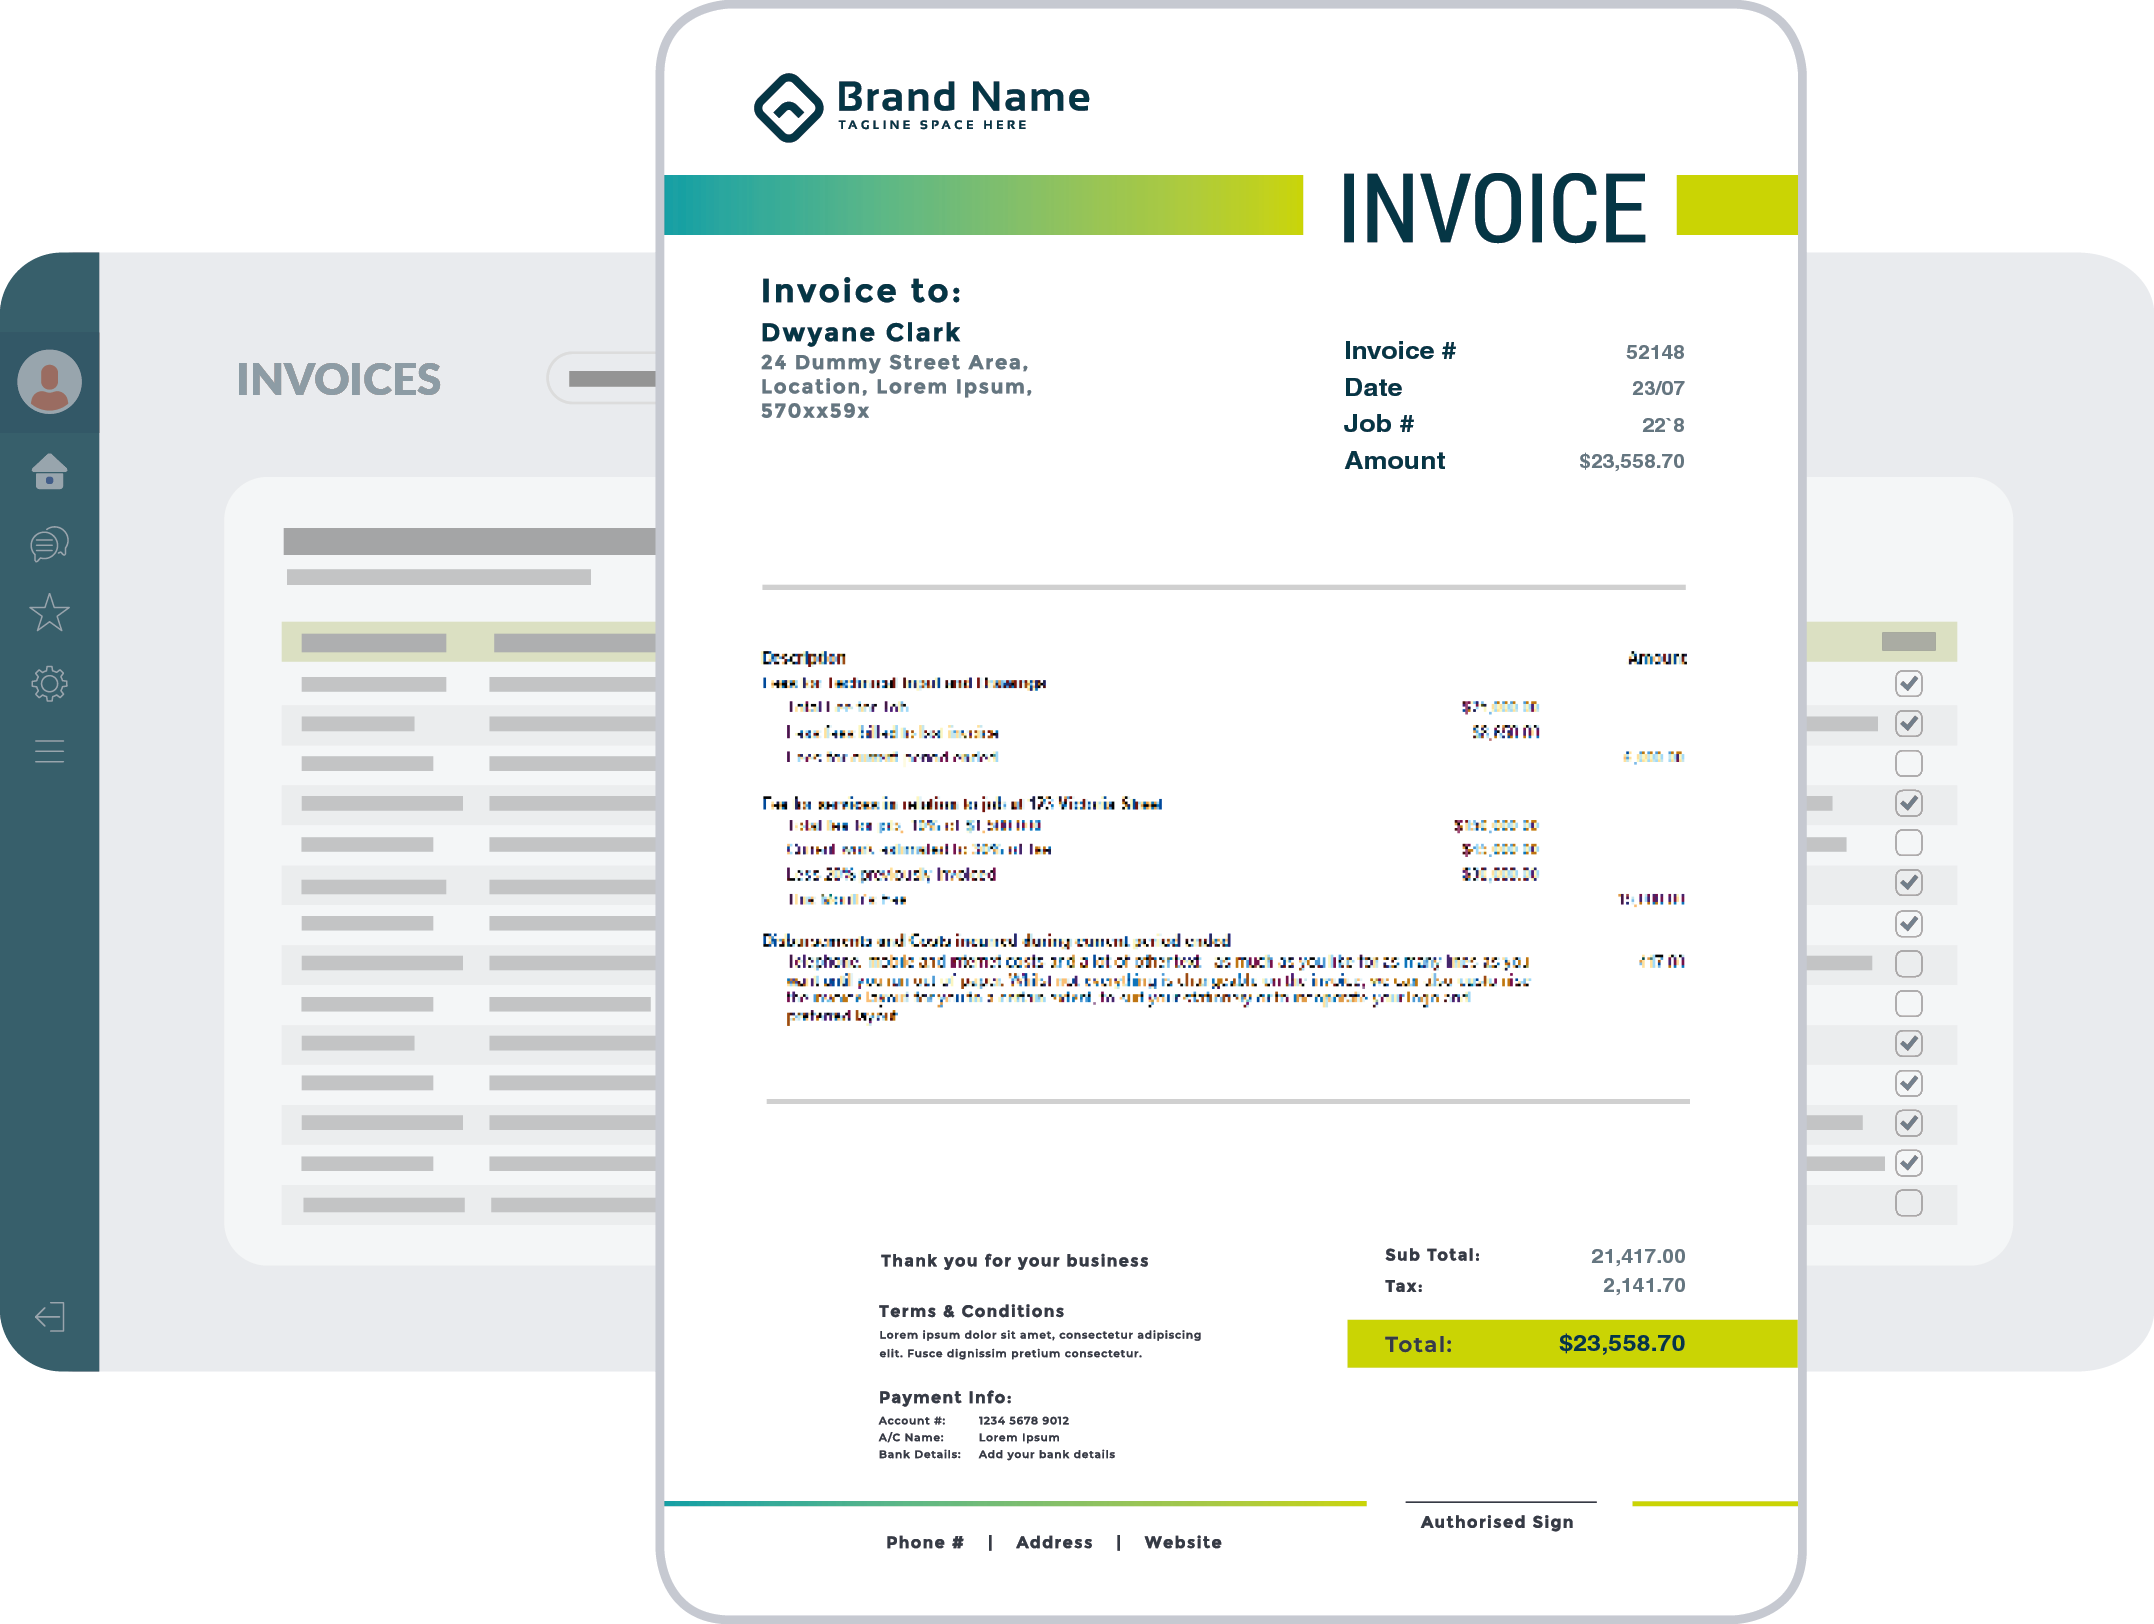 Project Management Features - Invoicing Software